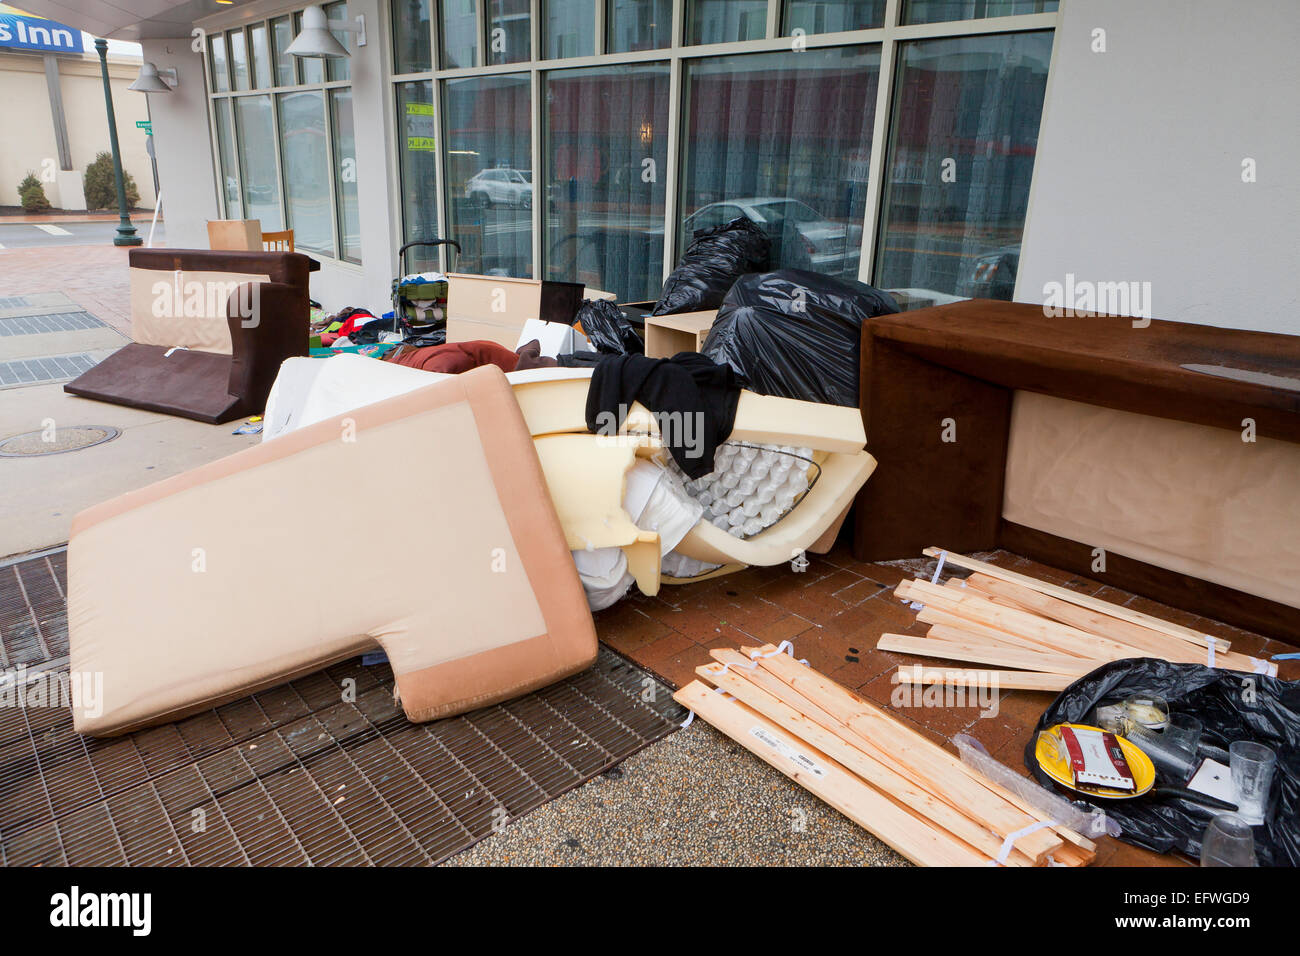 Furniture of evicted tenant on sidewalk of apartment building - USA Stock Photo